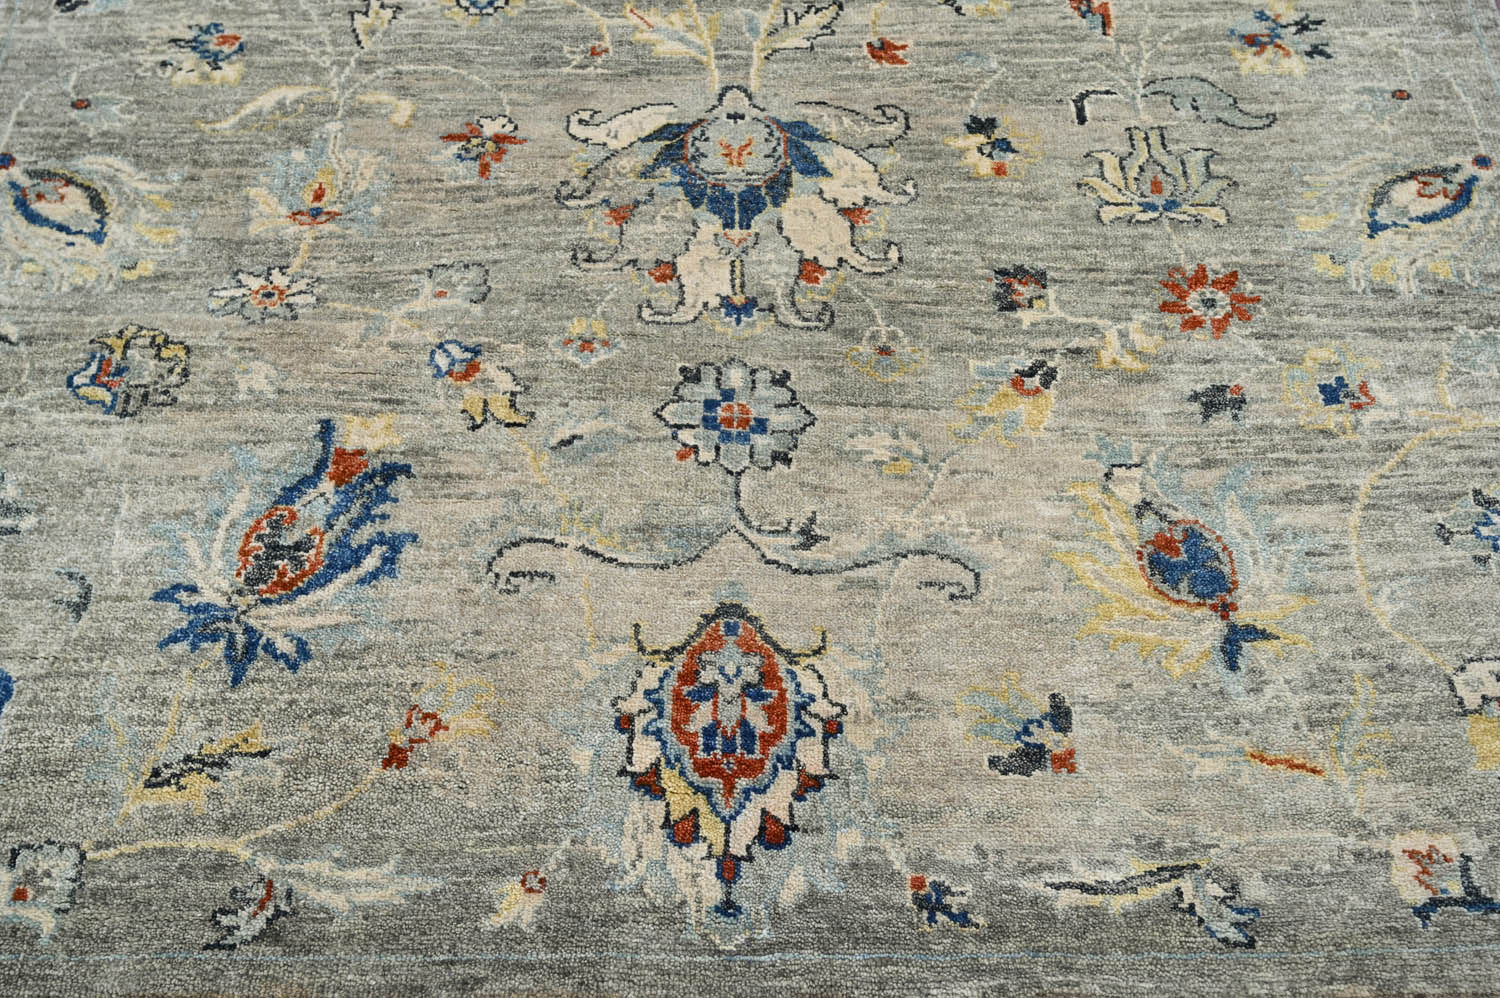 5x8 Gray Beige Blue Color Hand Knotted Transitional Wool Transitional Oriental Rug